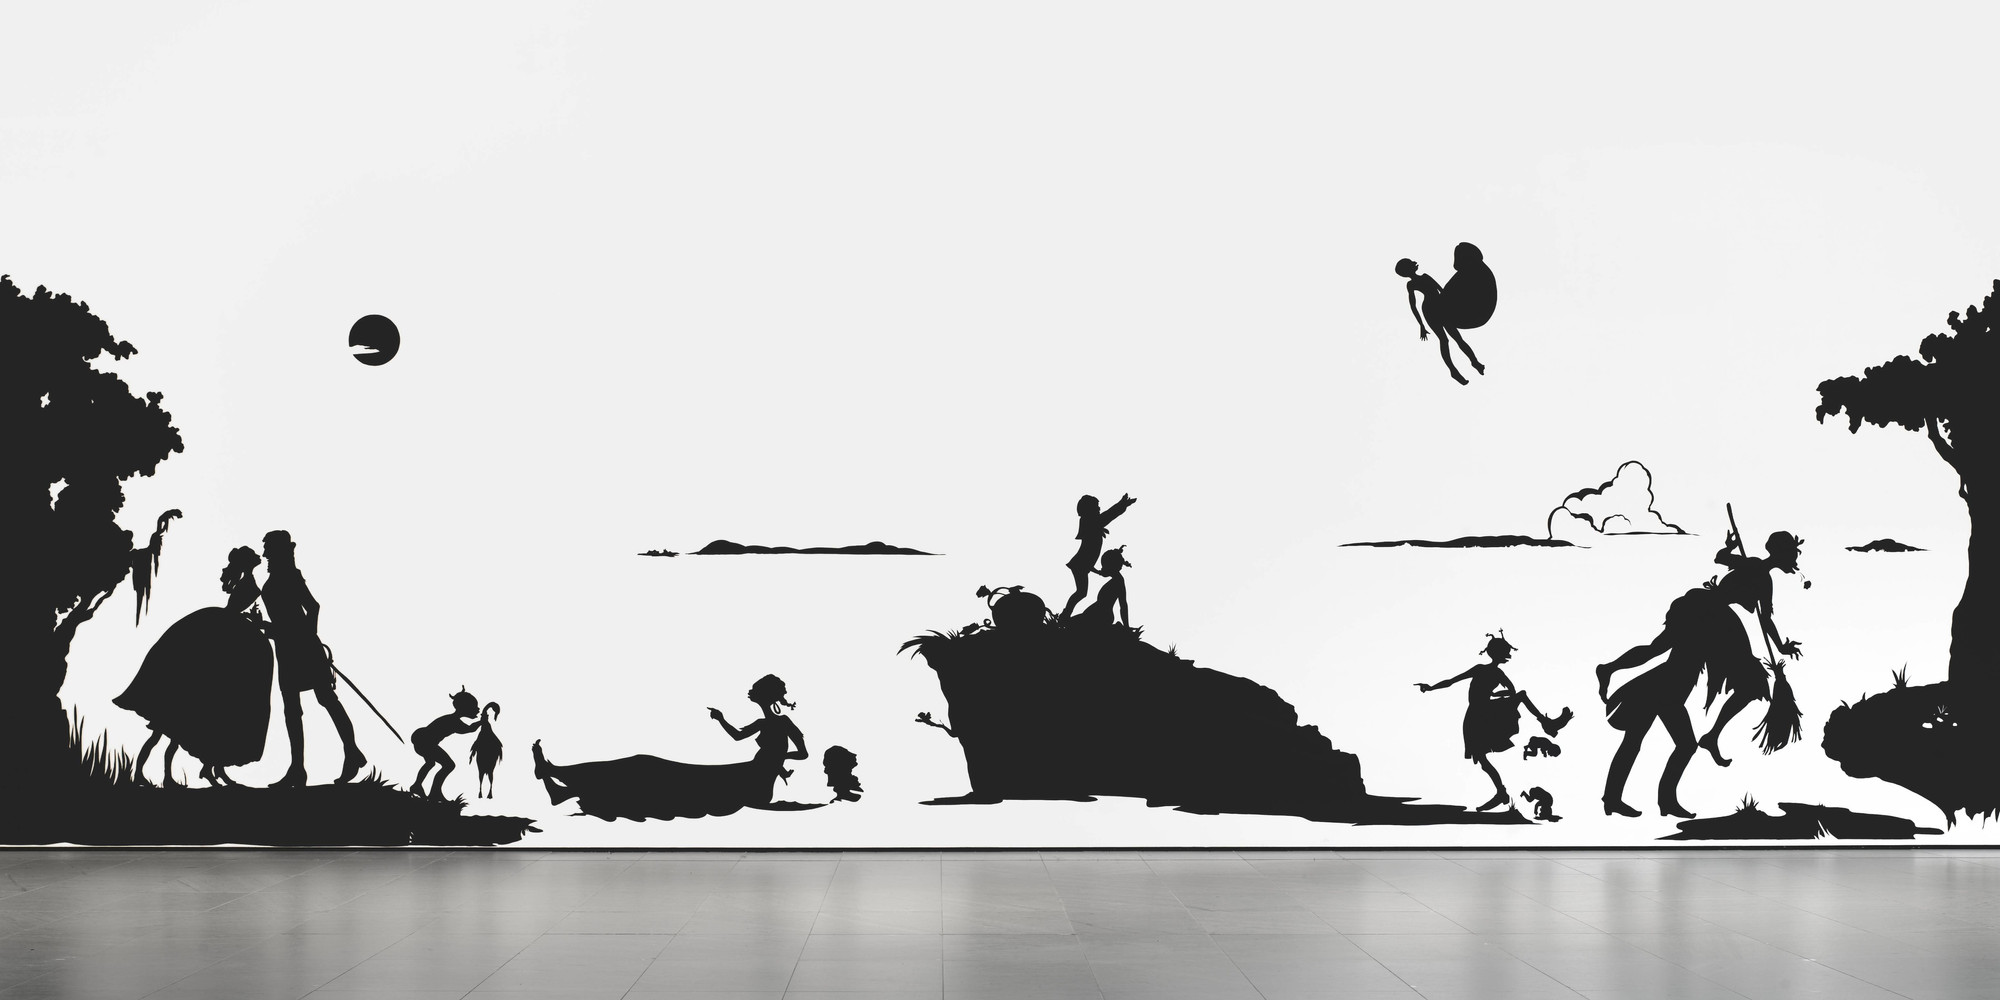 Kara Walker. Gone: An Historical Romance of a Civil War as It Occurred b’tween the Dusky Thighs of One Young Negress and Her Heart. 1994. Paper, Overall 13 x 50&#39; (396.2 x 1524 cm). Gift of The Speyer Family Foundation in honor of Marie-Josée Kravis. © 2020 Kara Walker